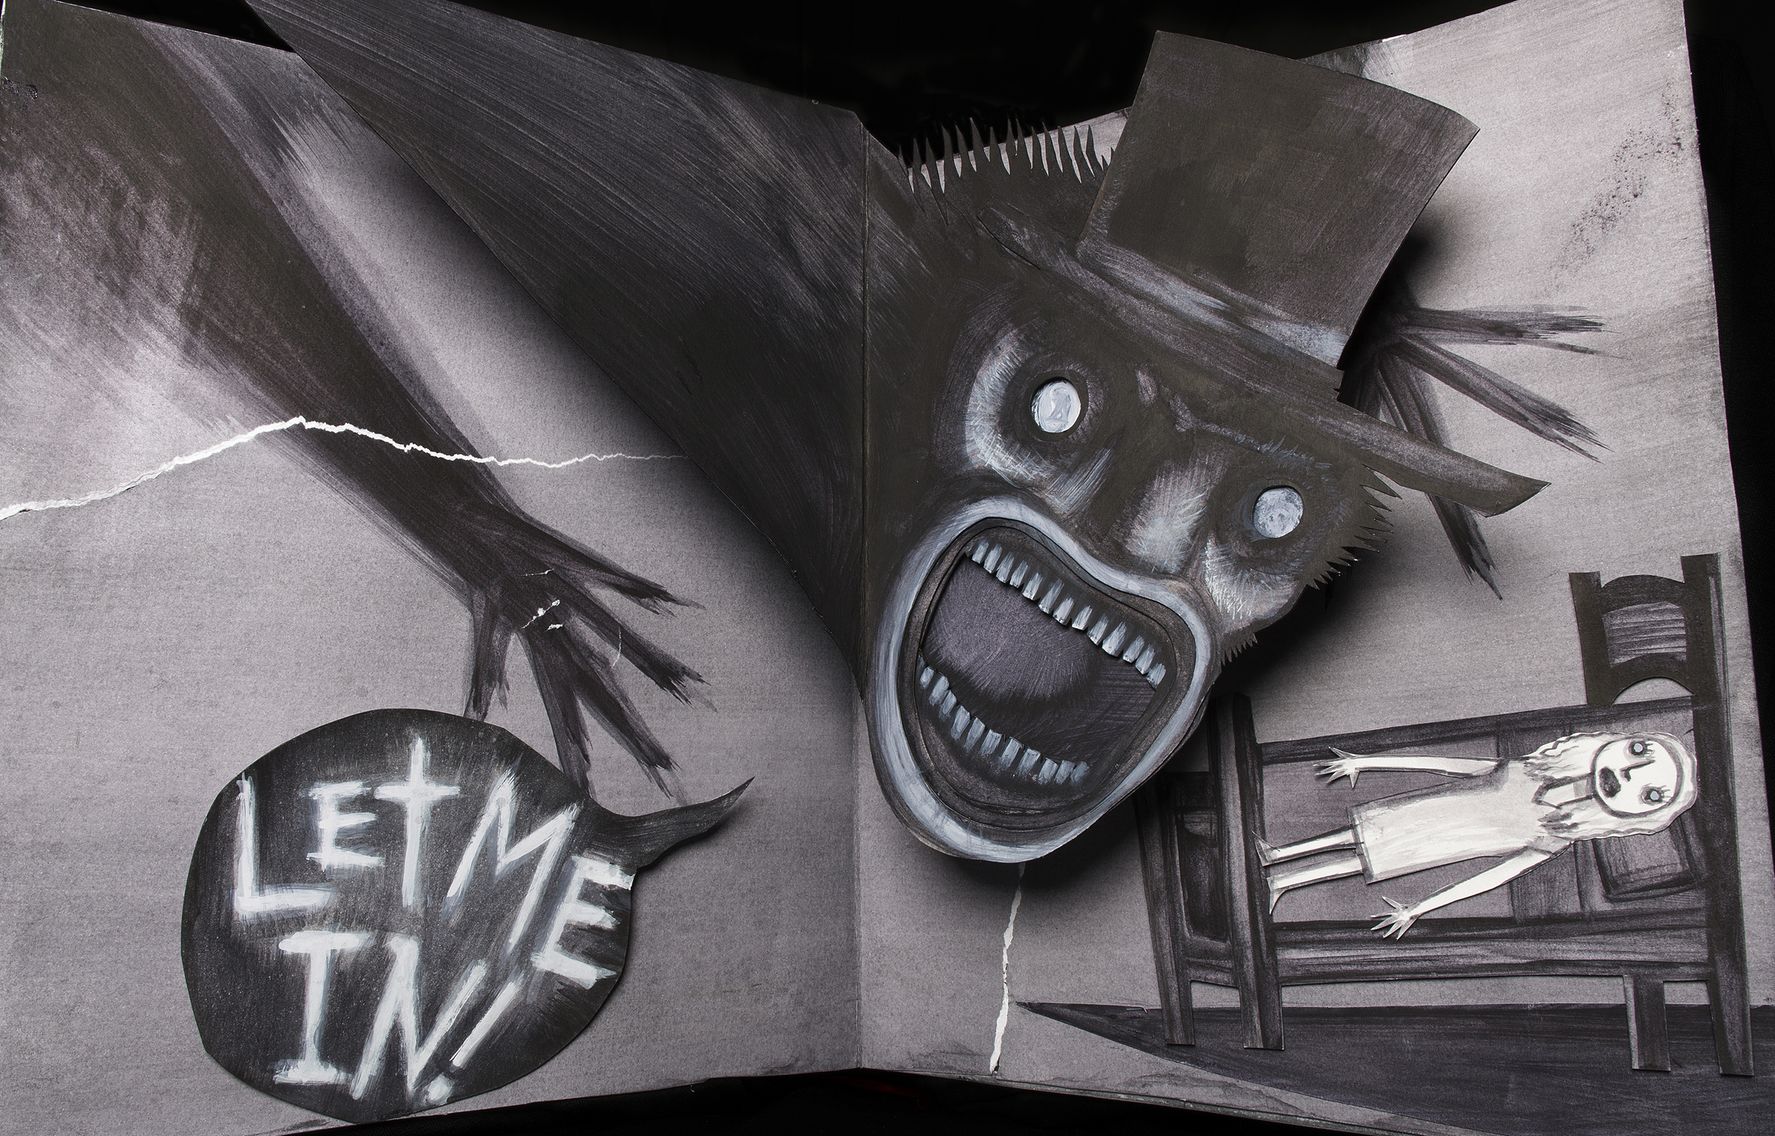 The Babadook illustration